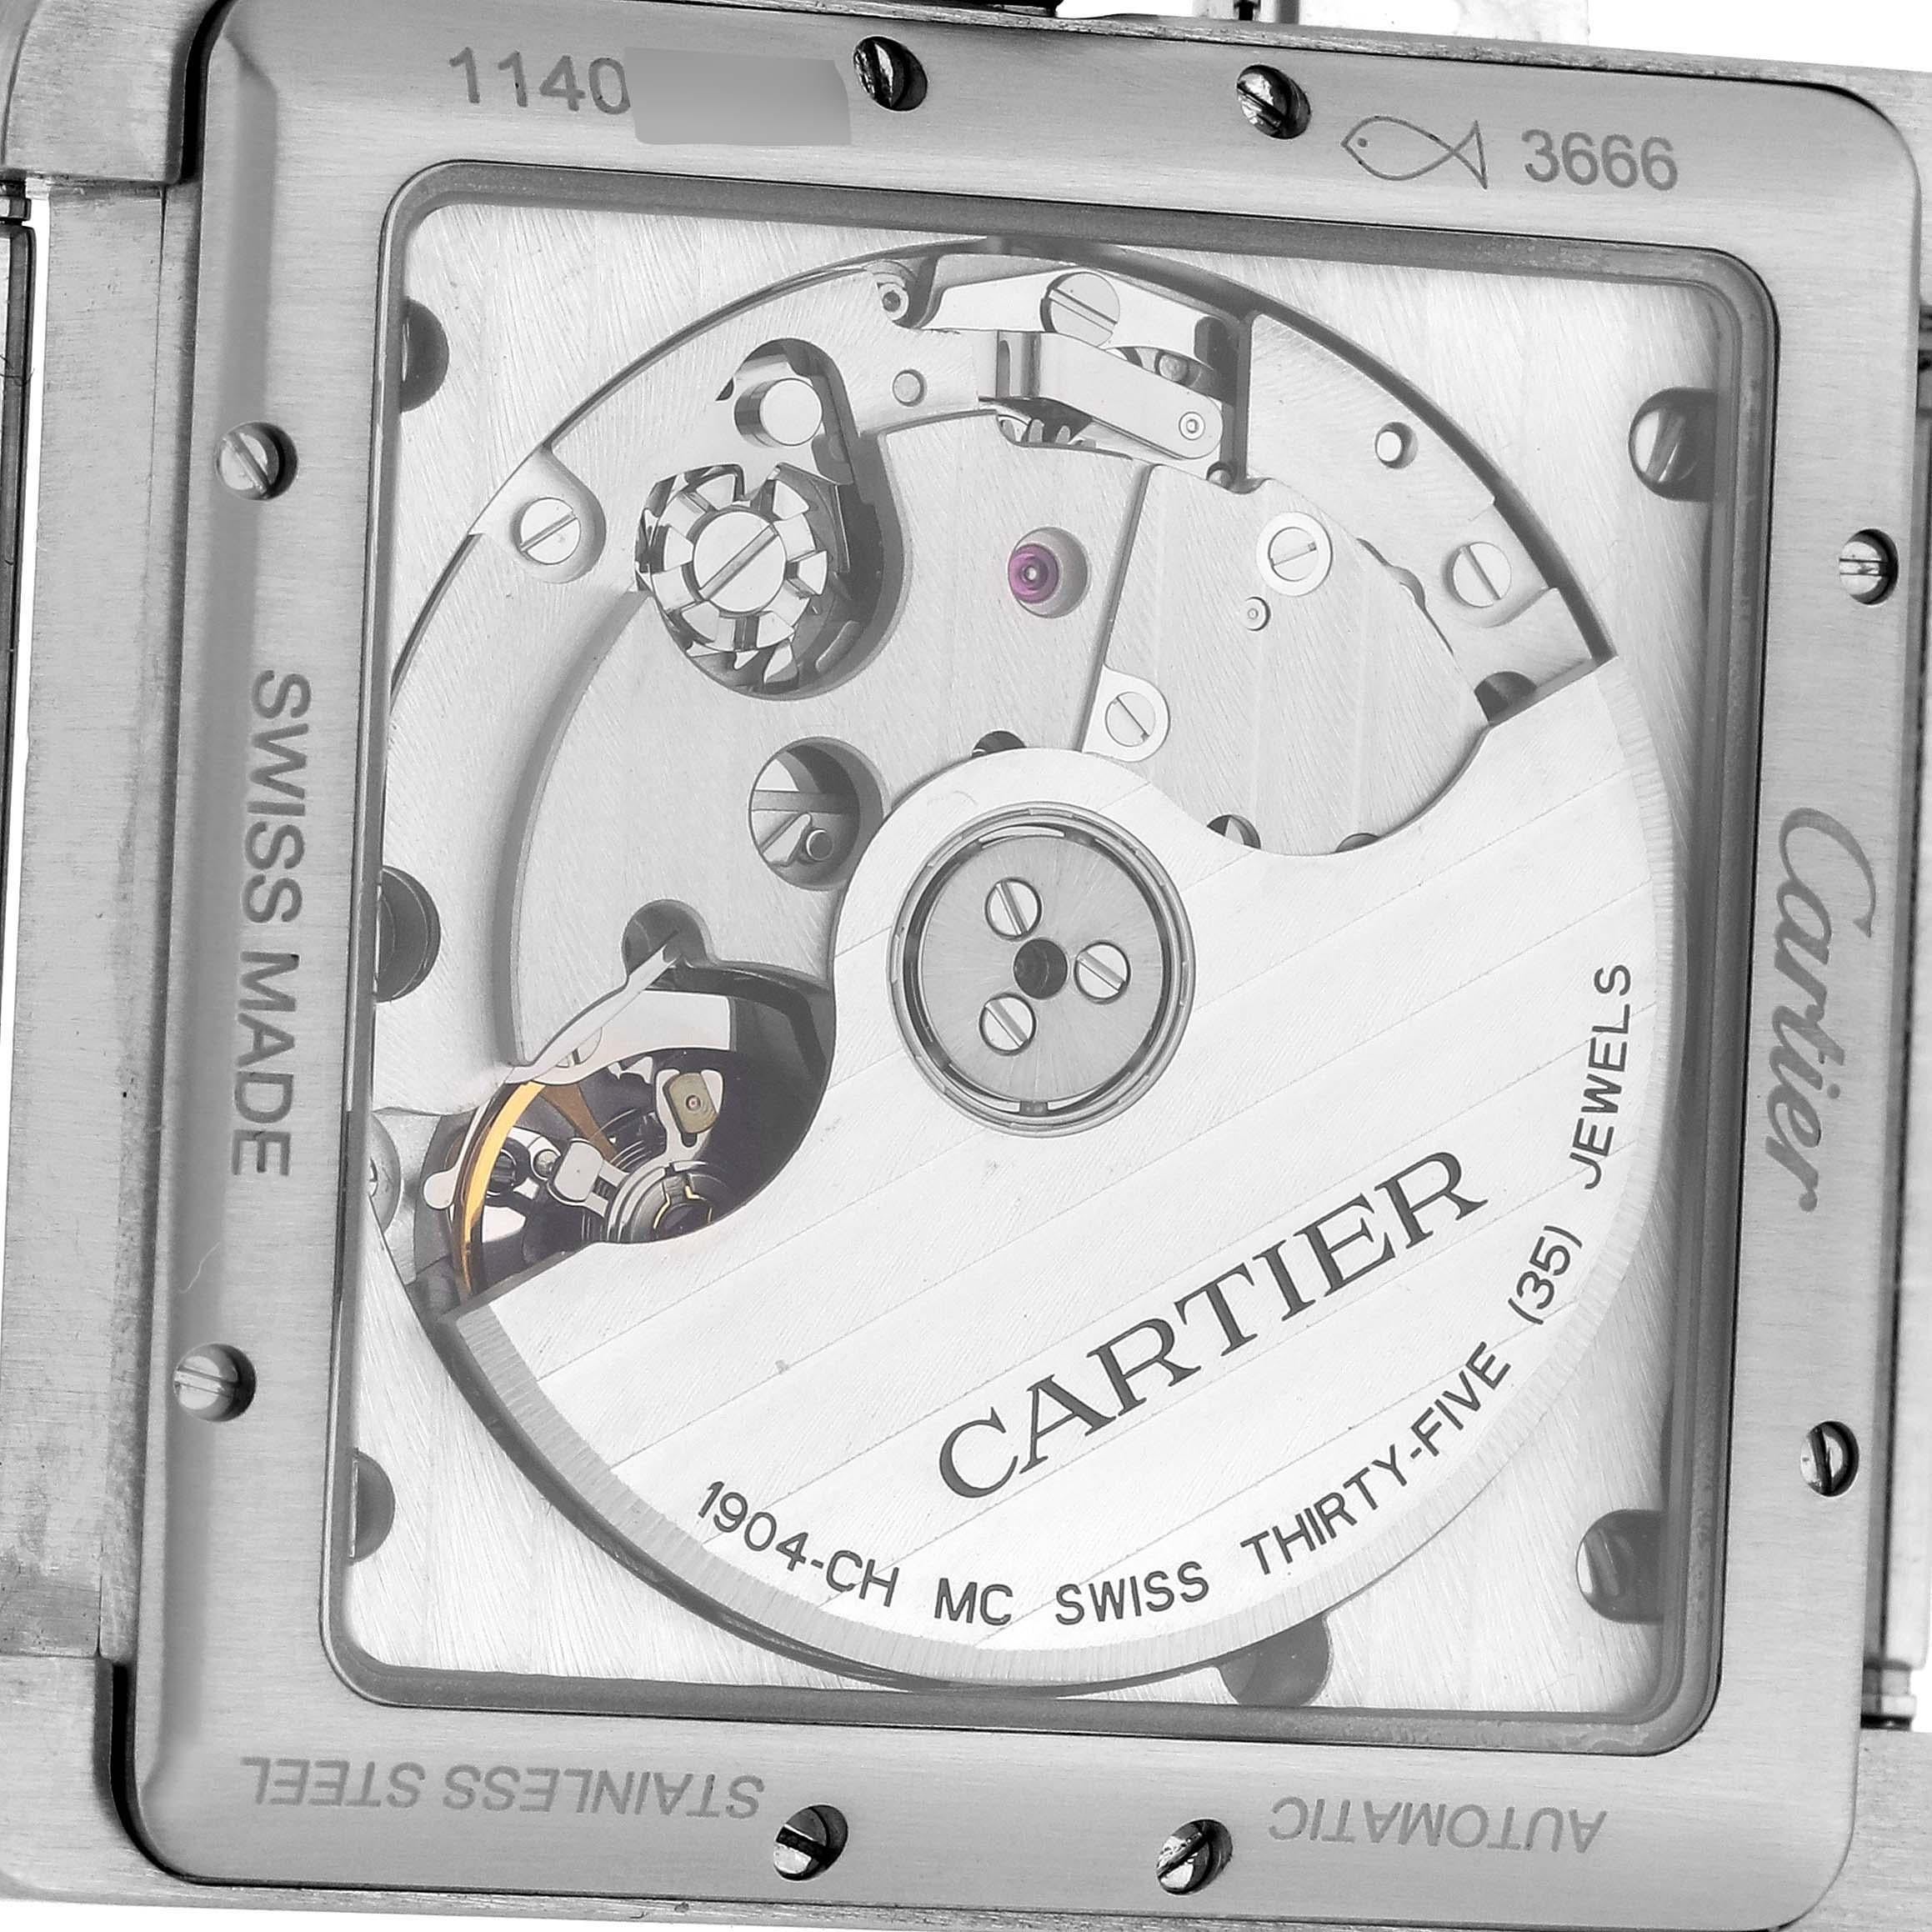 Cartier Tank MC Silver Dial Automatic Chronograph Mens Watch W5330007 Papers. Automatic self-winding chronograph movement. Three body brushed stainless steel case 34.3 x 44.0 mm. Protected octagonal crown set with the faceted blue spinel.